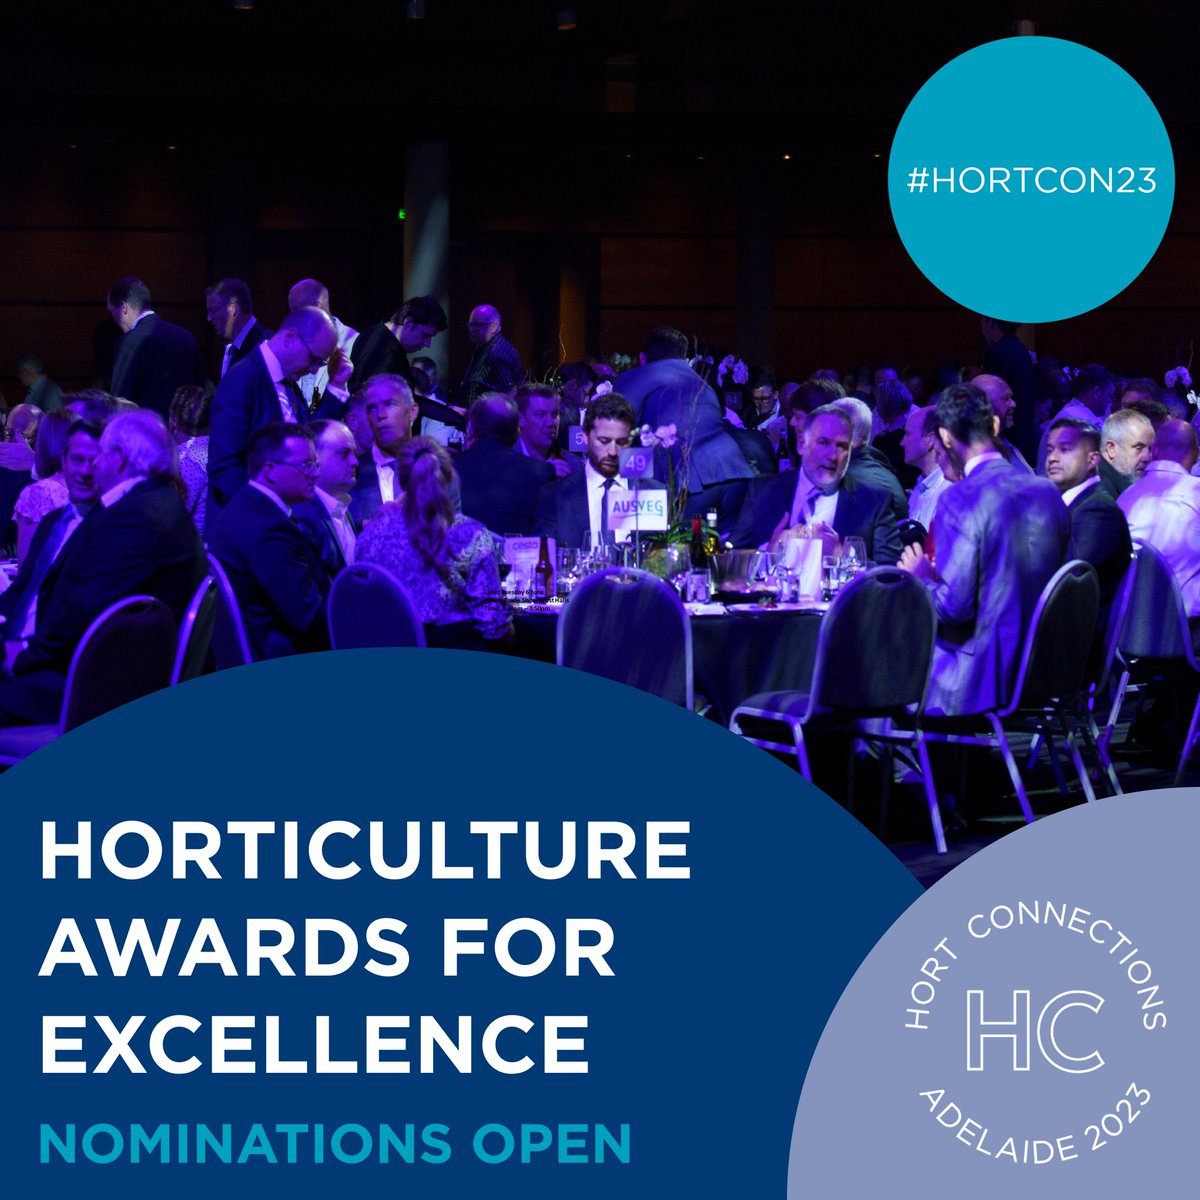 The #HortCon23 Horticulture Awards for Excellence recognise and celebrate the outstanding achievements of trailblazing, innovative individuals and companies making an impact on the #horticulture industry. Nominations are open NOW! Find out more 👉hortconnections.com.au/awards/